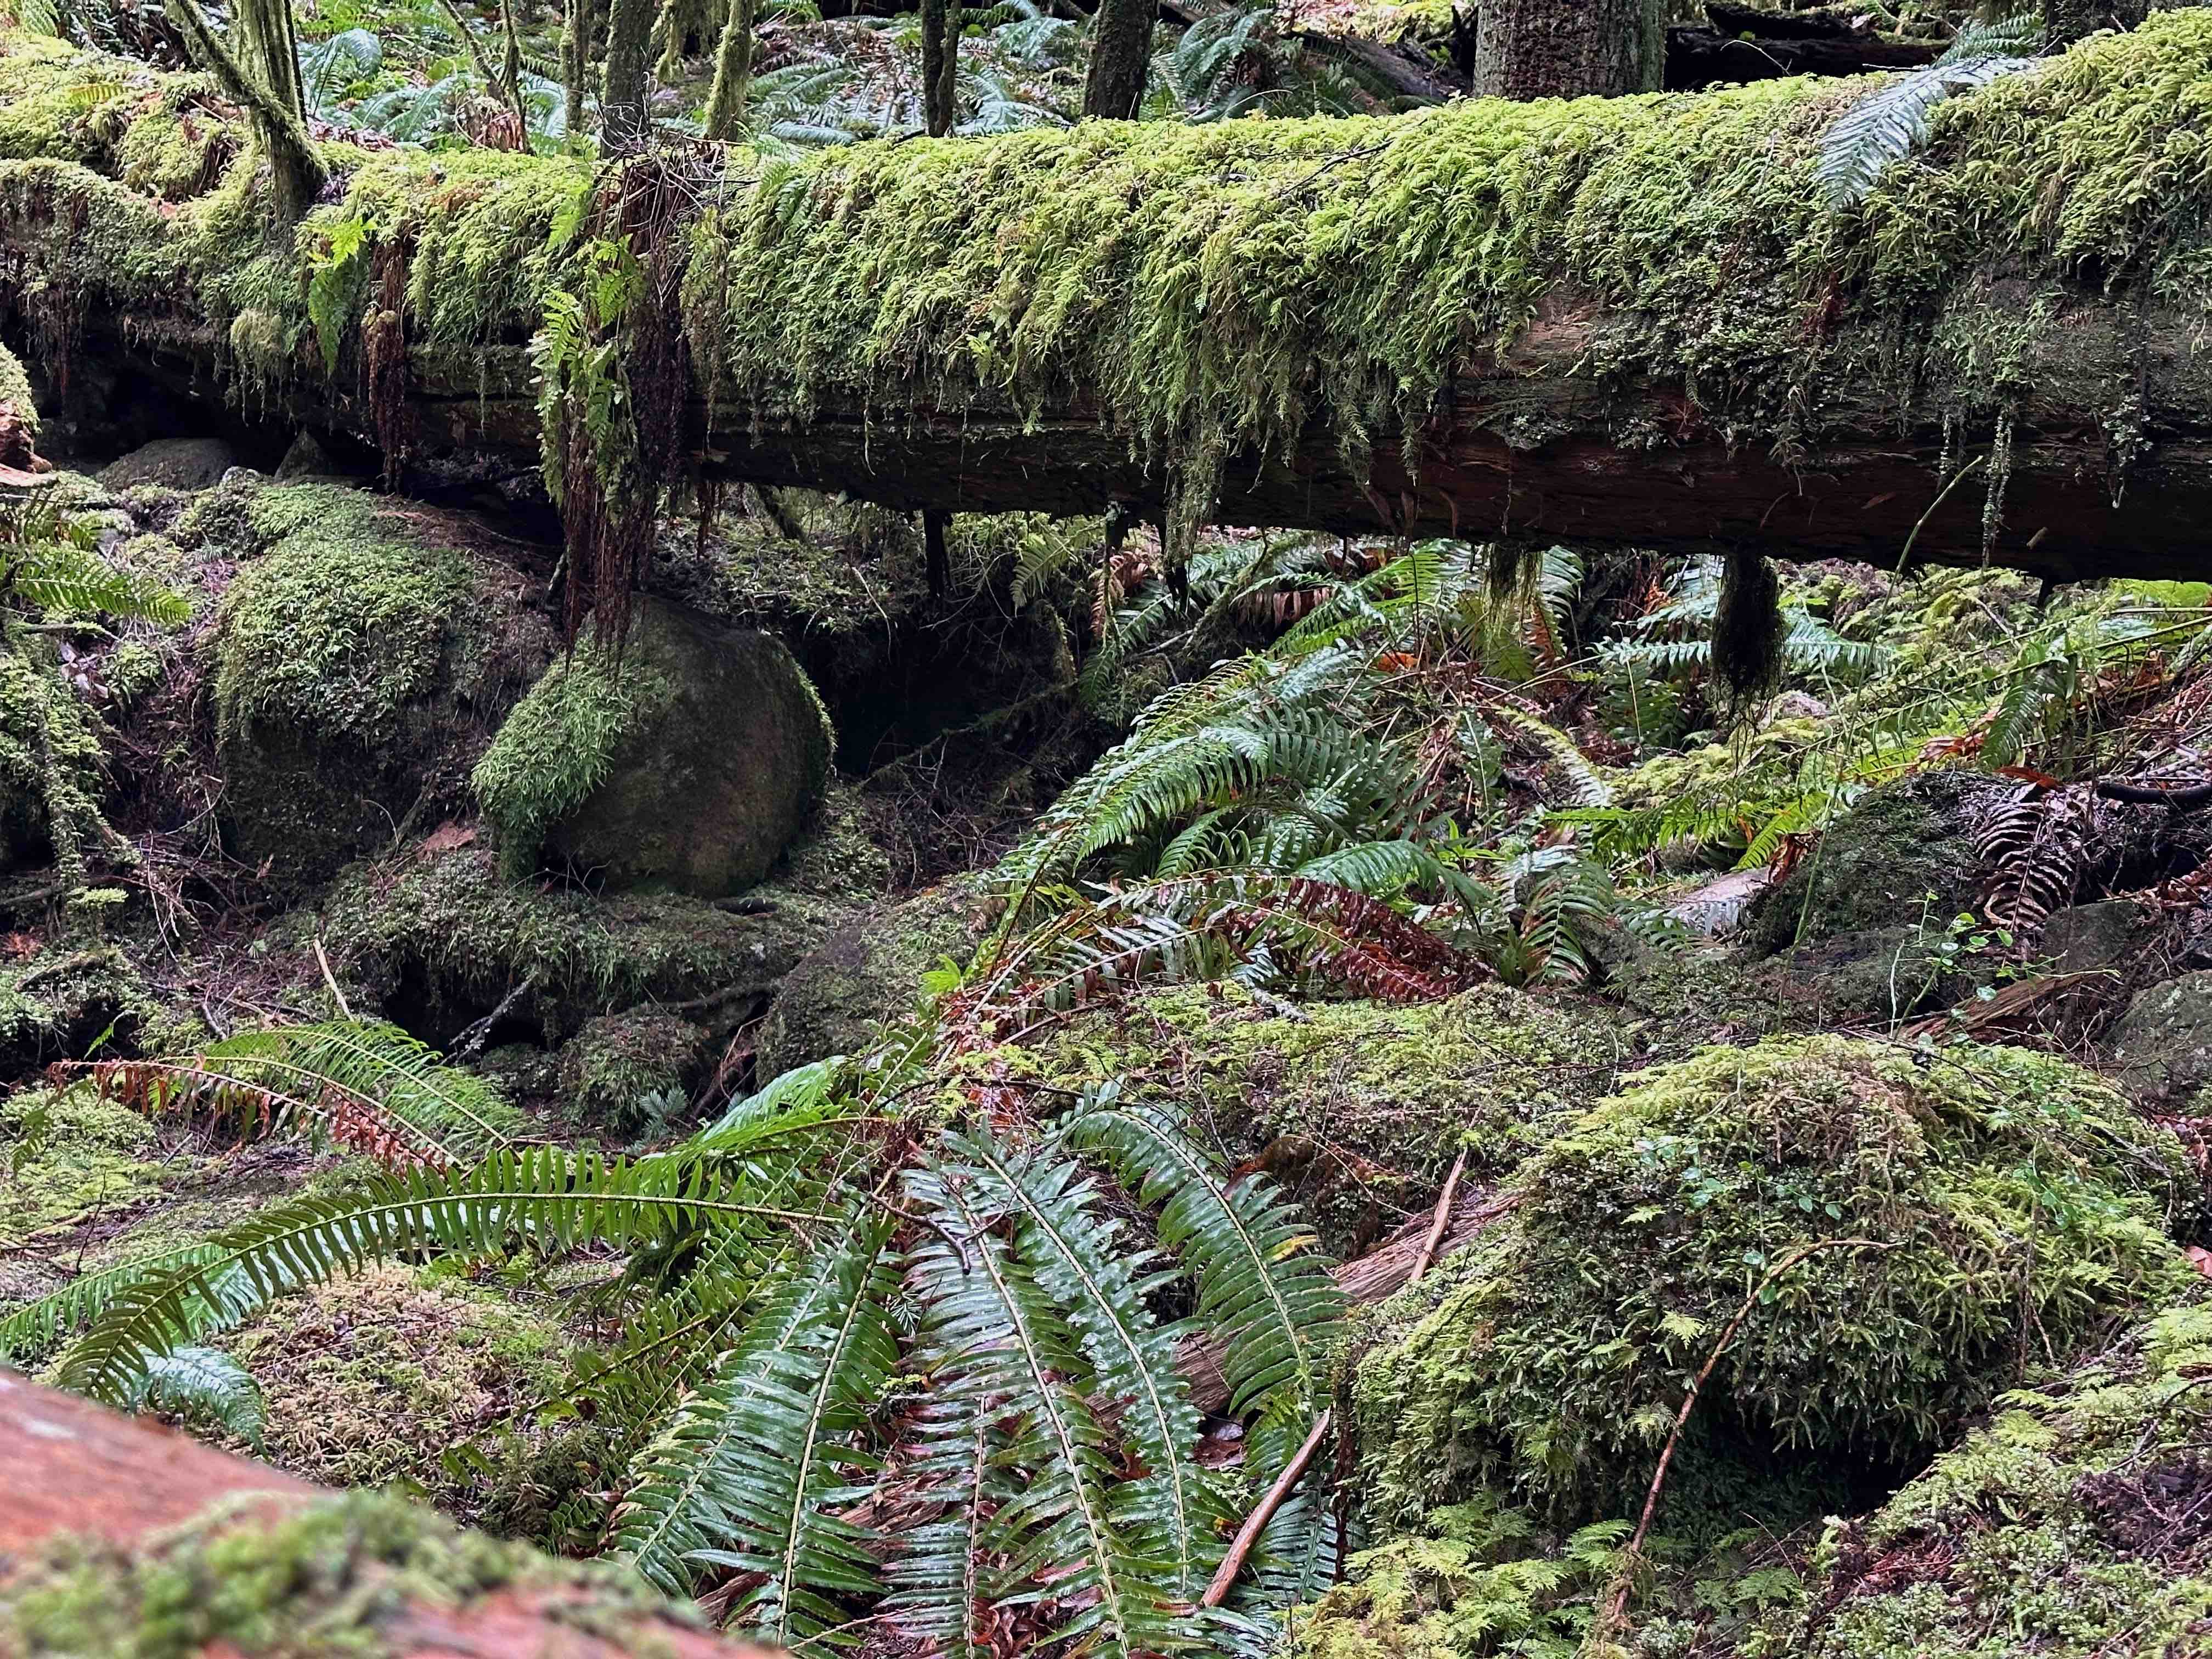 Moss and ferns